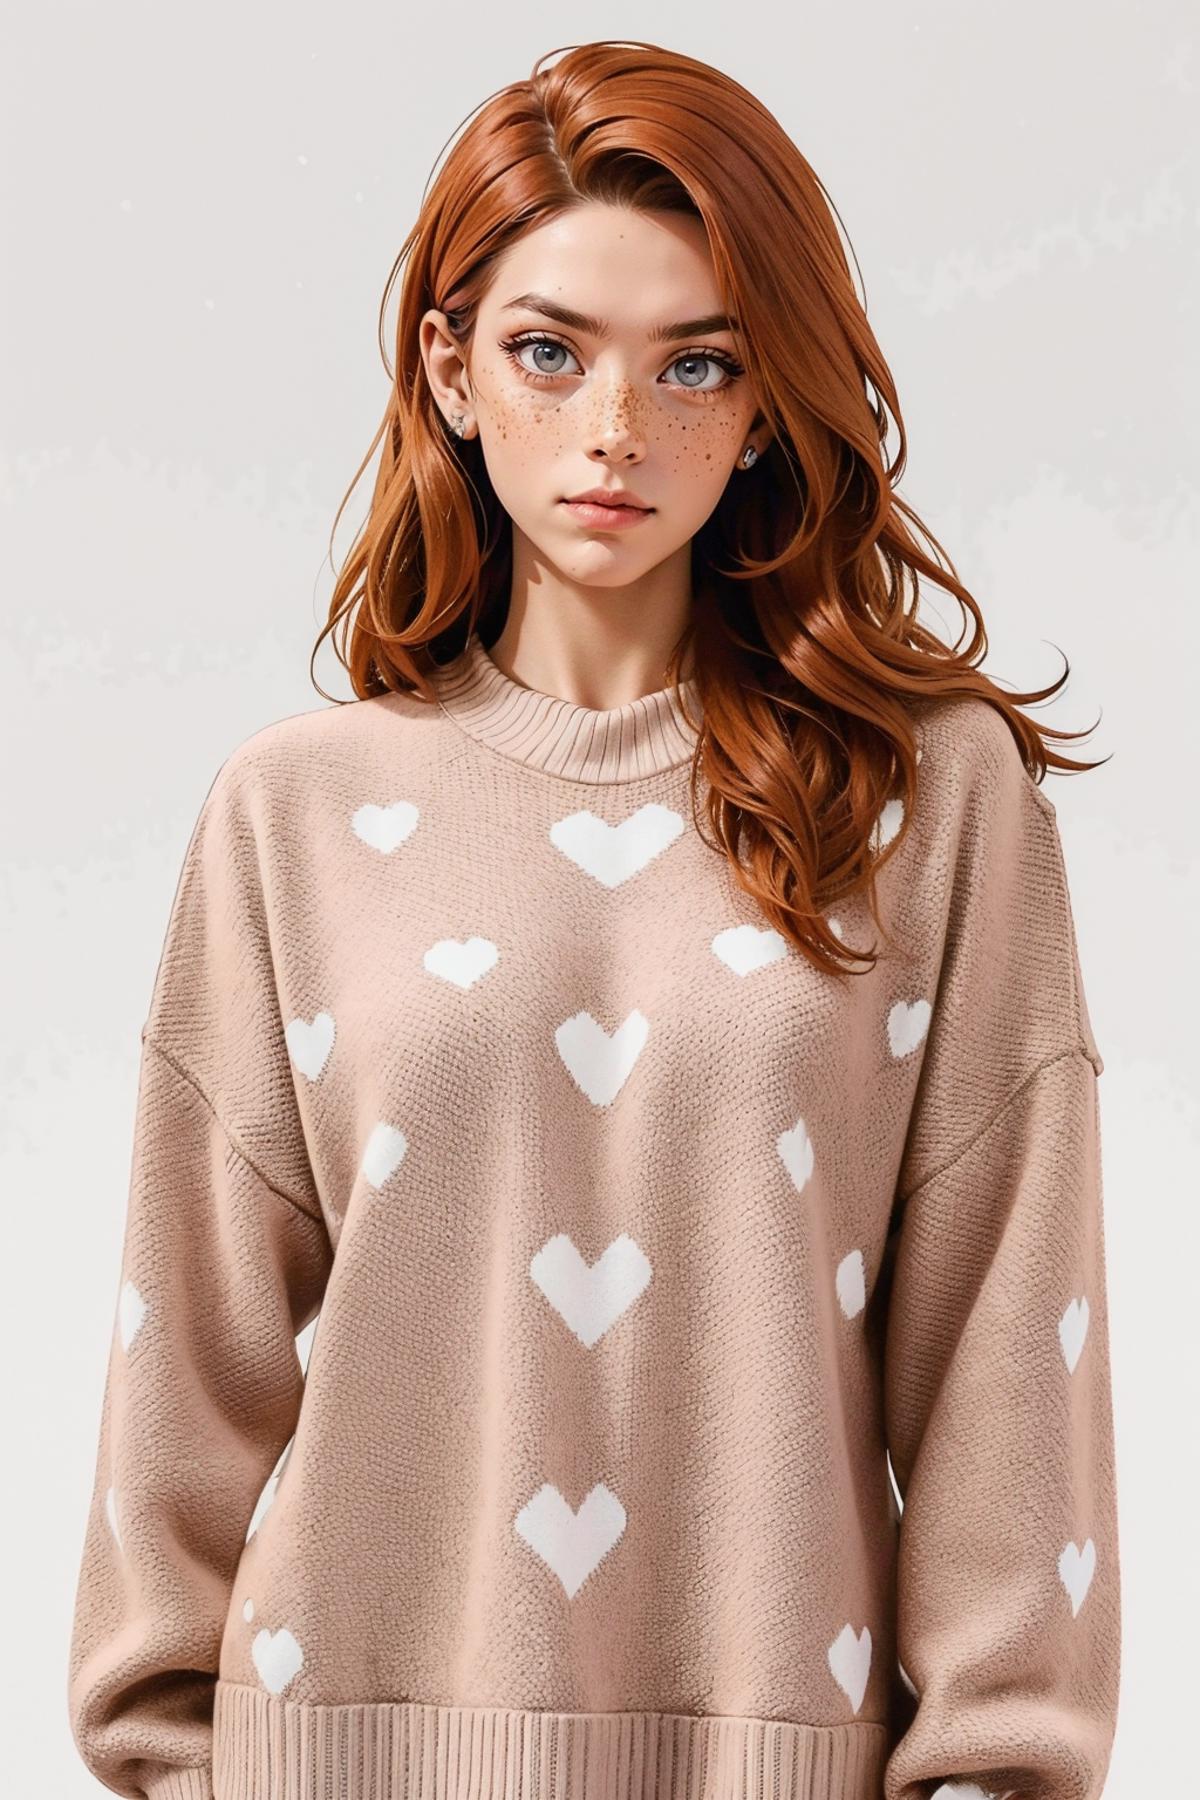 Heart Print Sweater image by freckledvixon